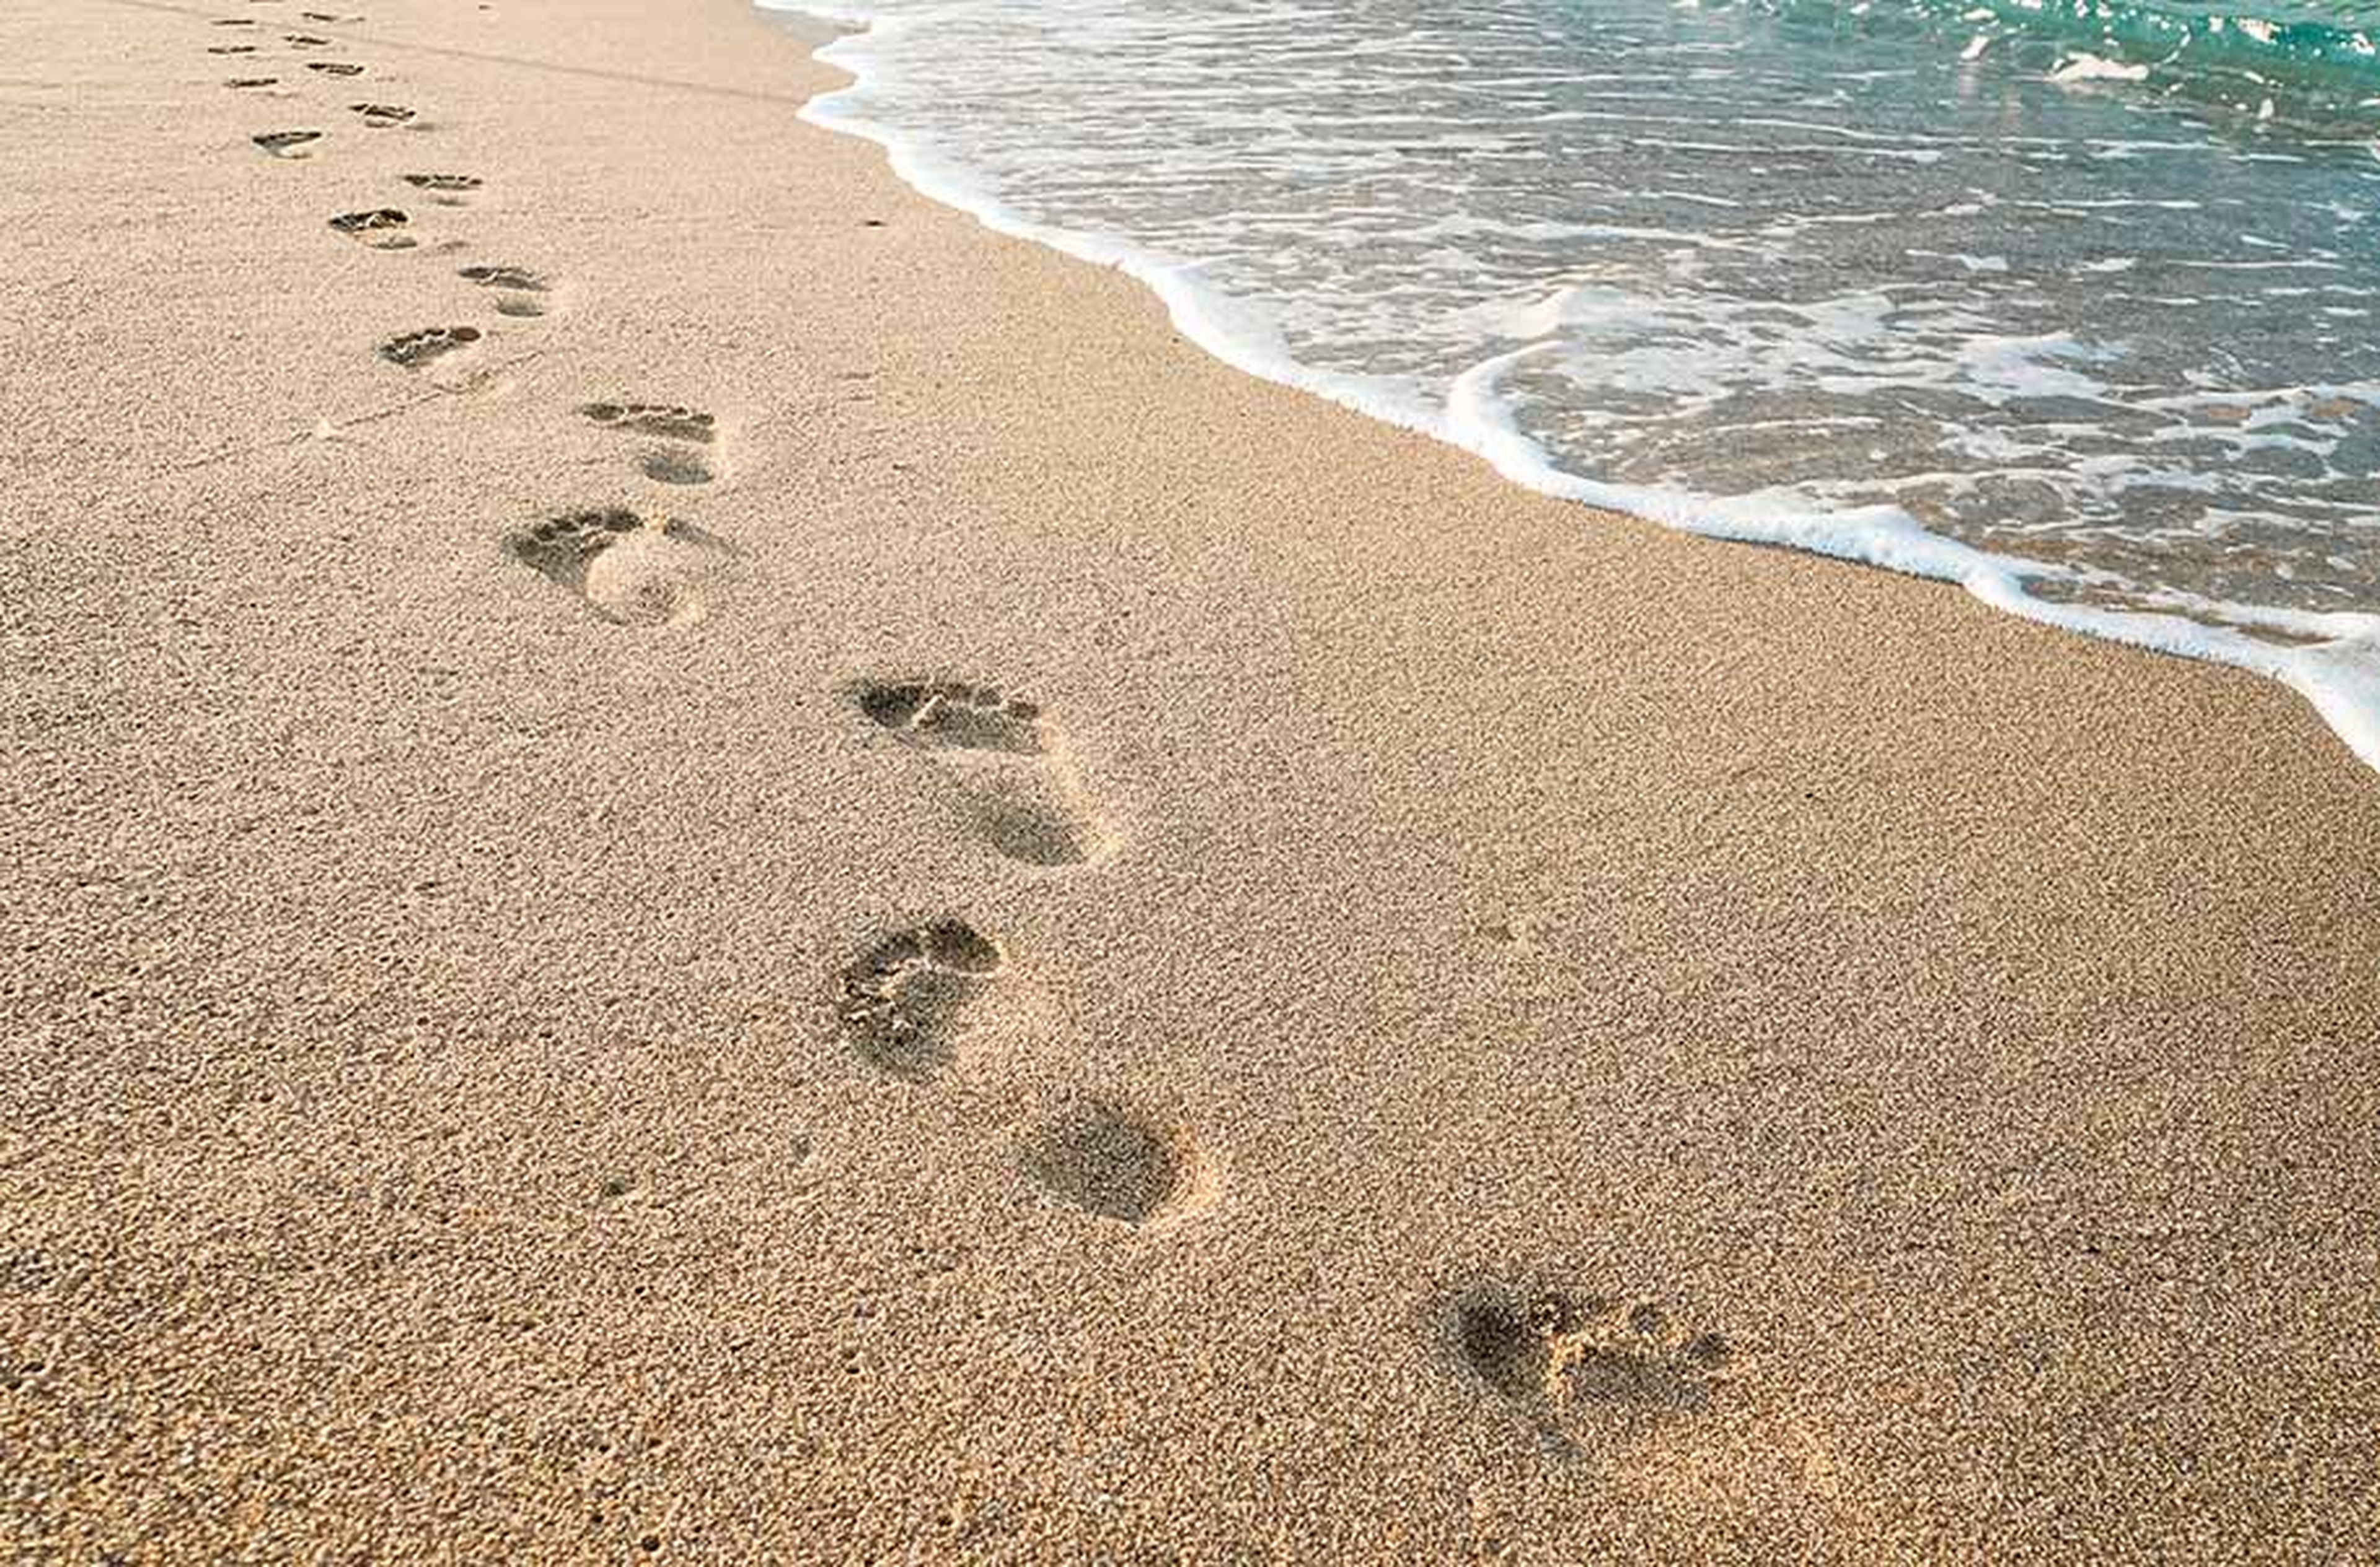 Footprints of human feet on the sand near the water on the beach